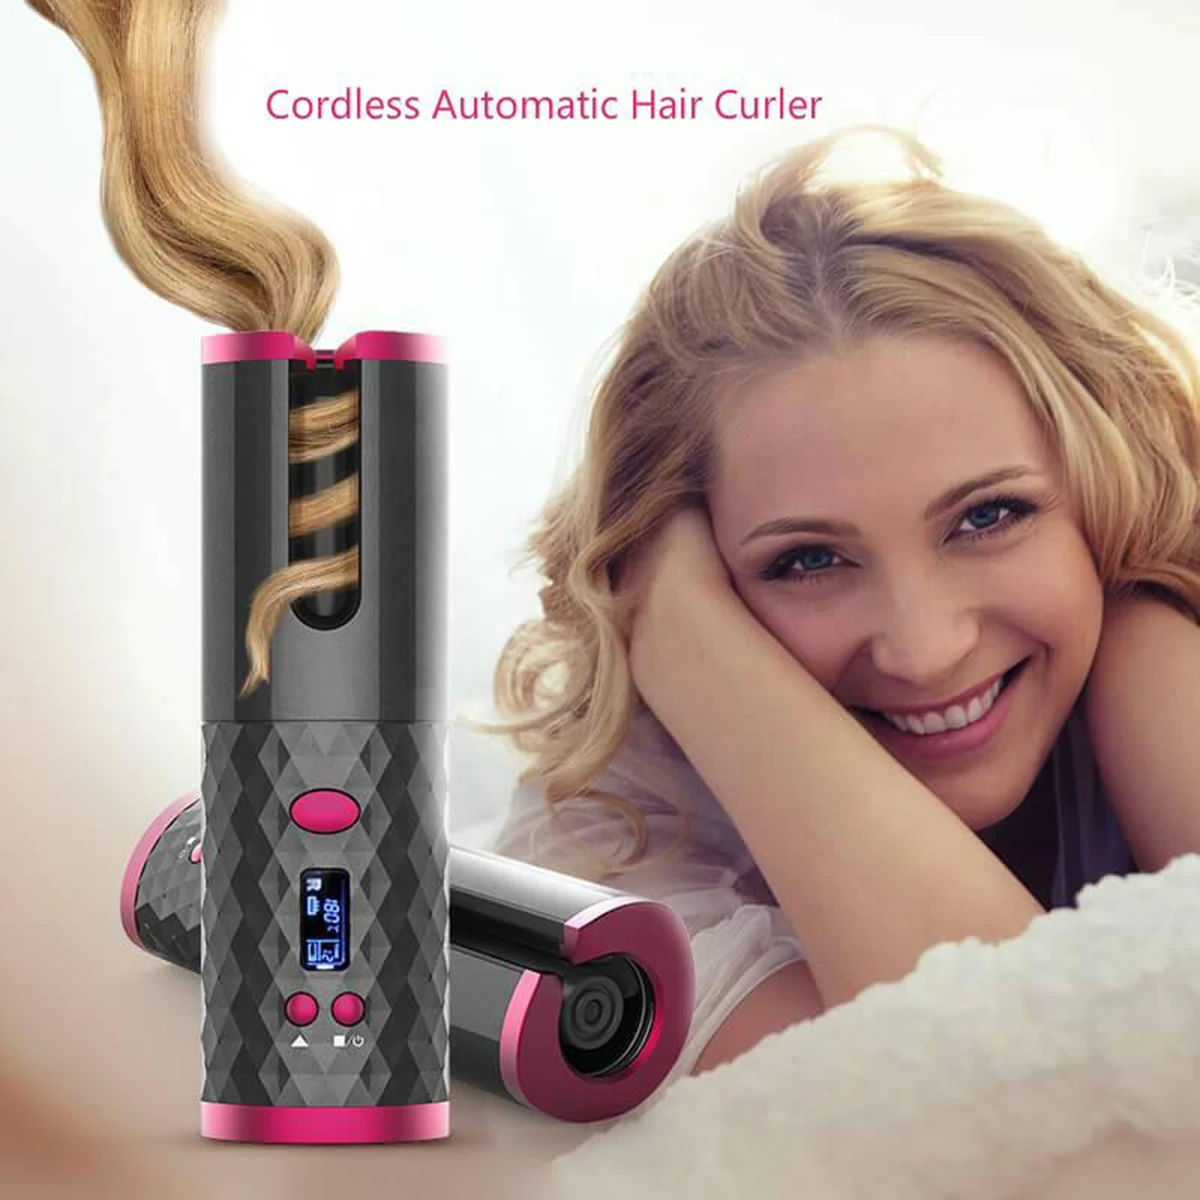 Wireless Automatic Hair Curling Iron Multifunctional USB Rechargeable Hair Curler Portable LCD Display Ceramic Curly Hair Tool